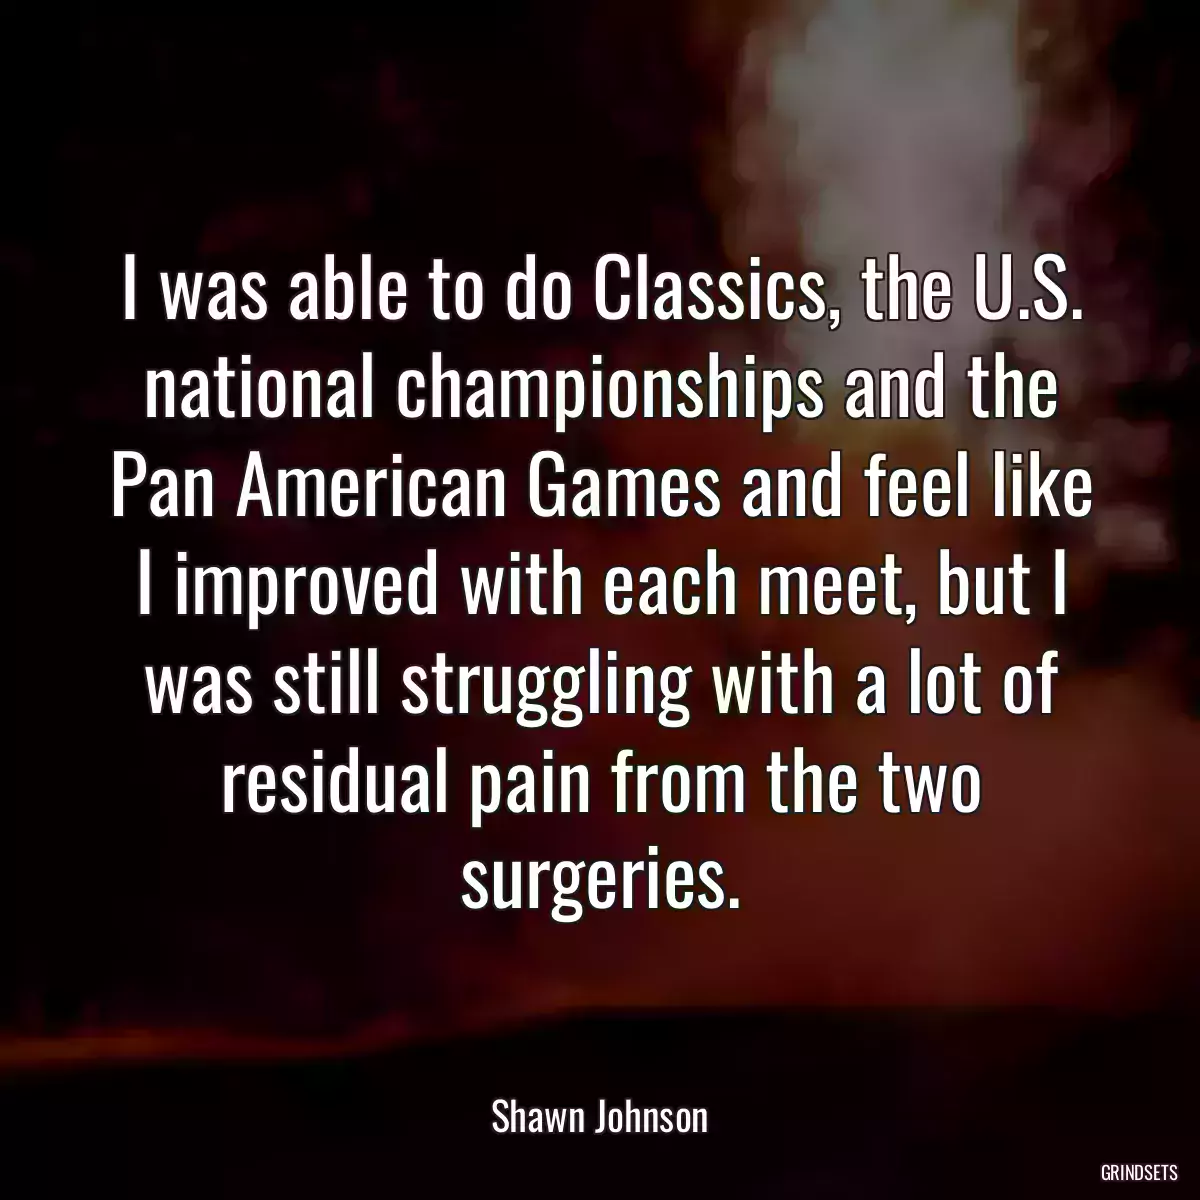 I was able to do Classics, the U.S. national championships and the Pan American Games and feel like I improved with each meet, but I was still struggling with a lot of residual pain from the two surgeries.